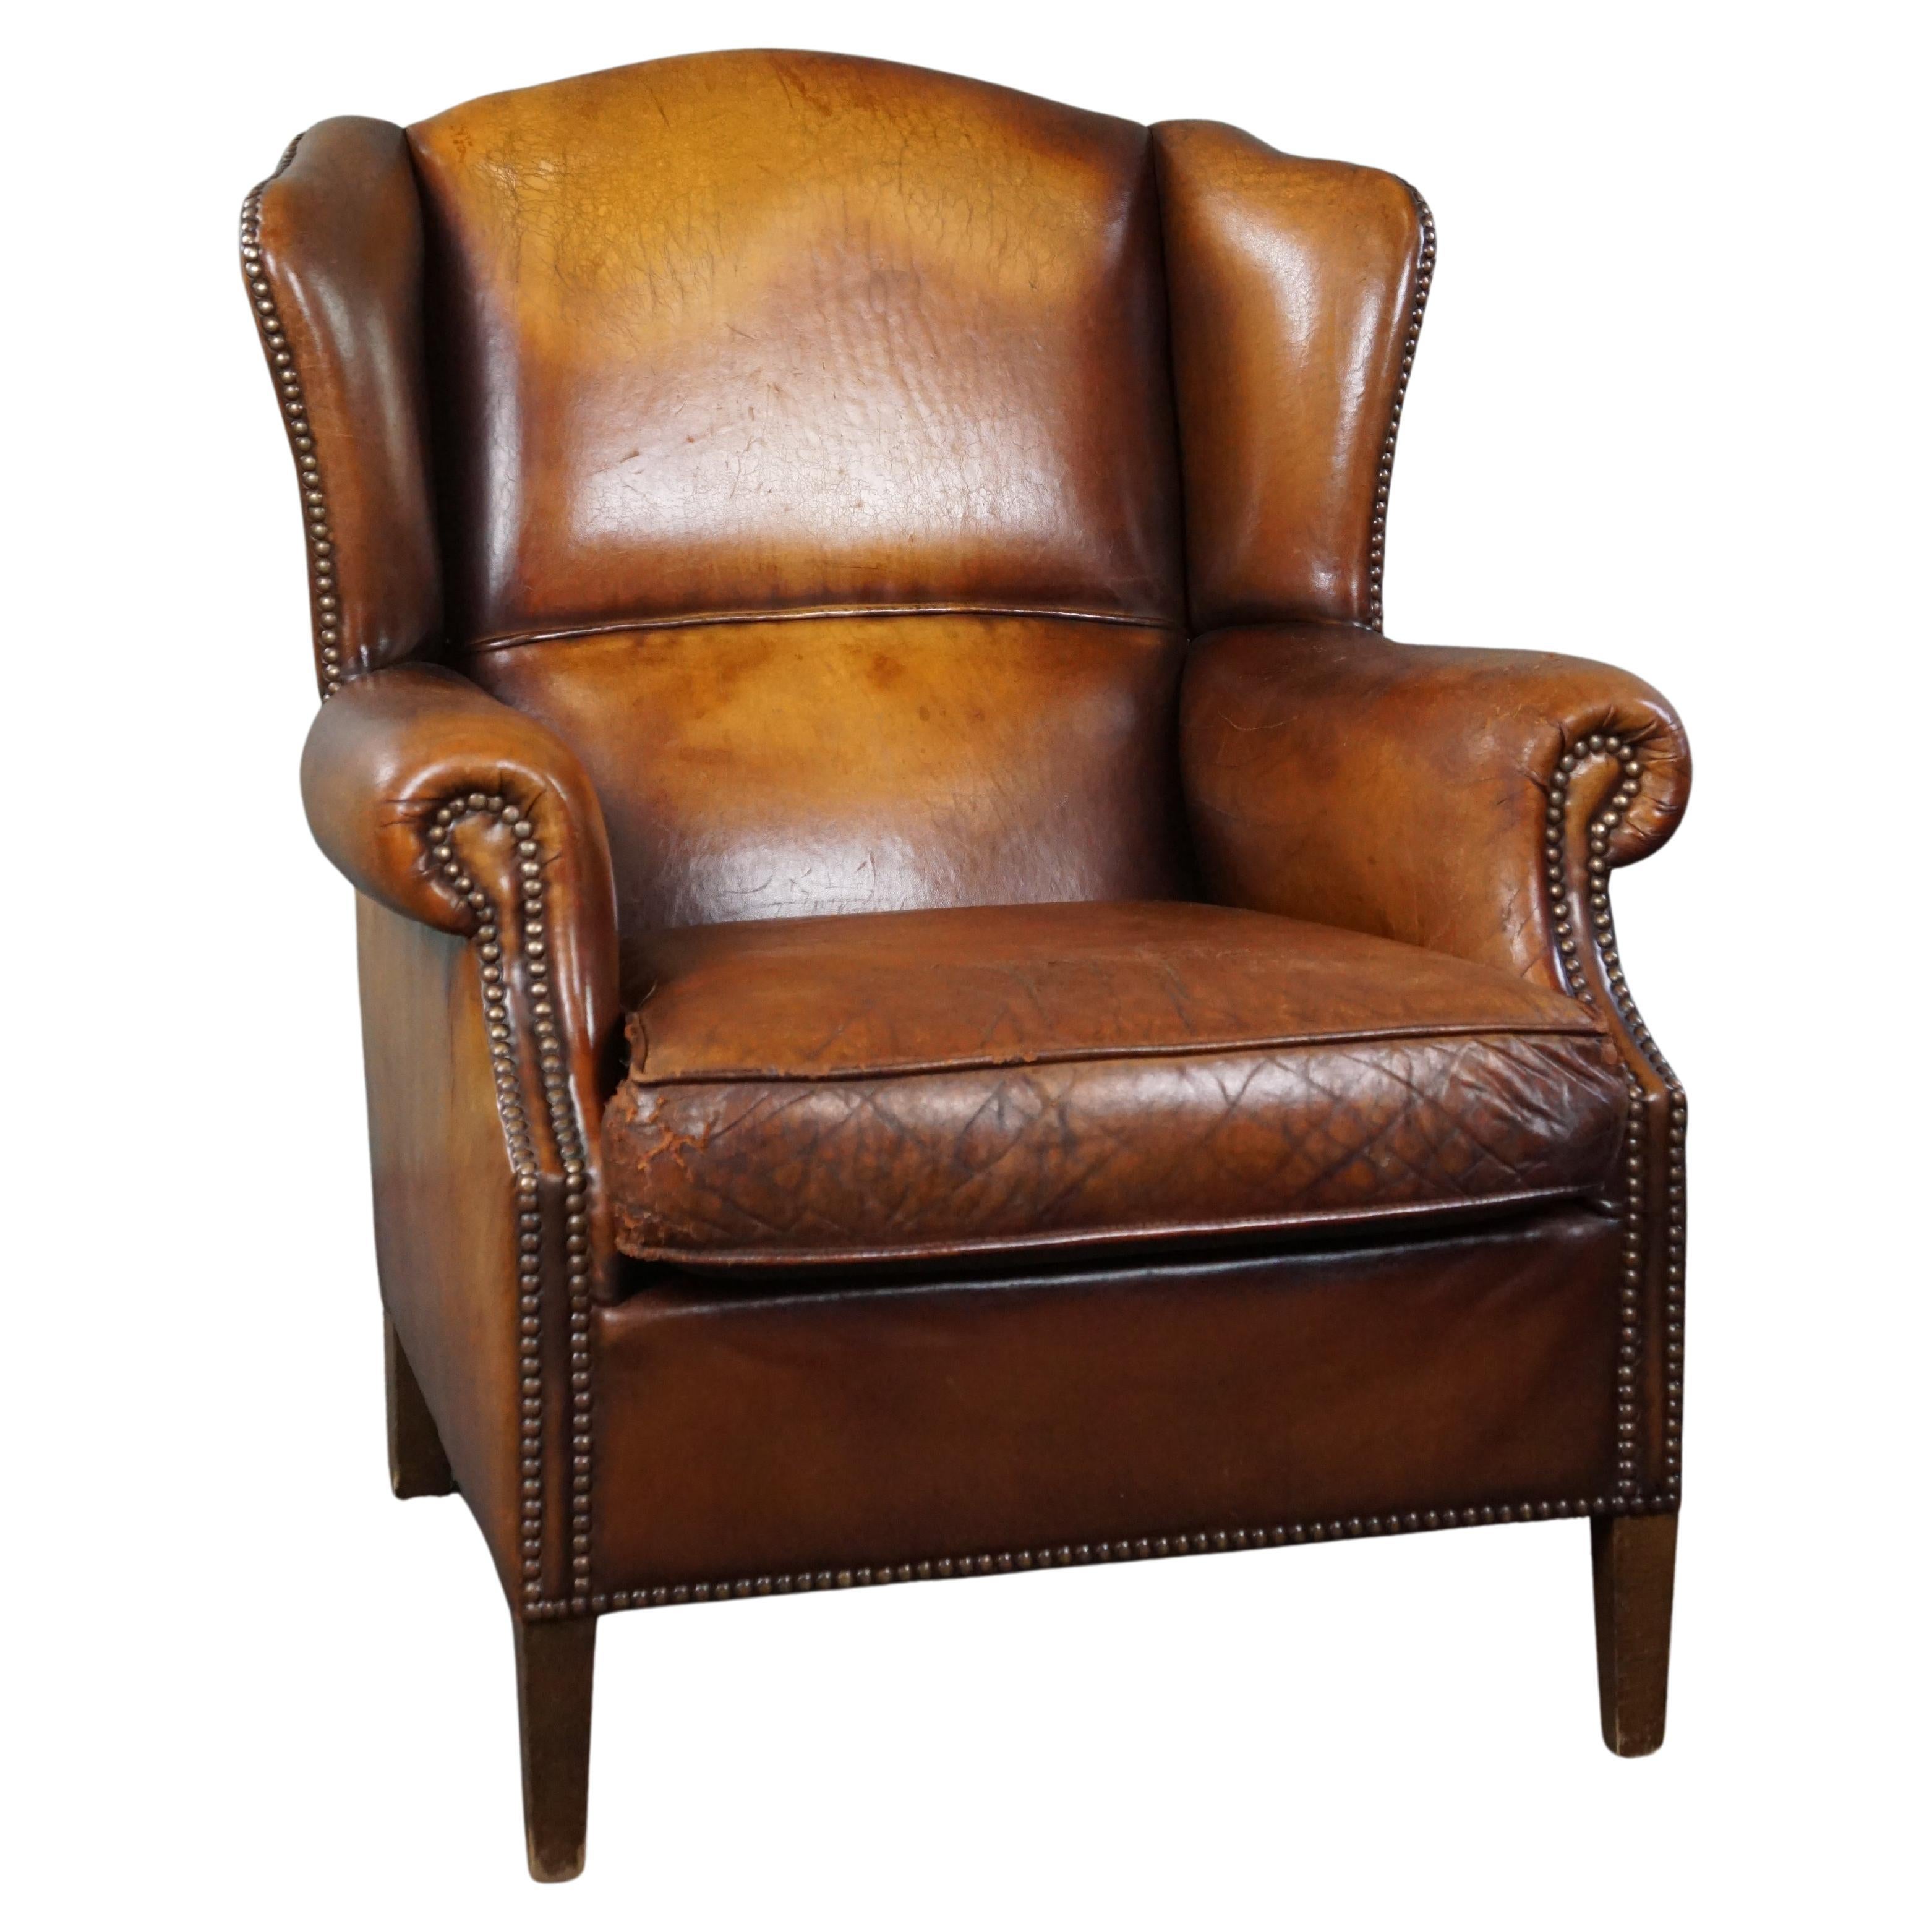 Sheep leather wingback chair with a beautiful patina